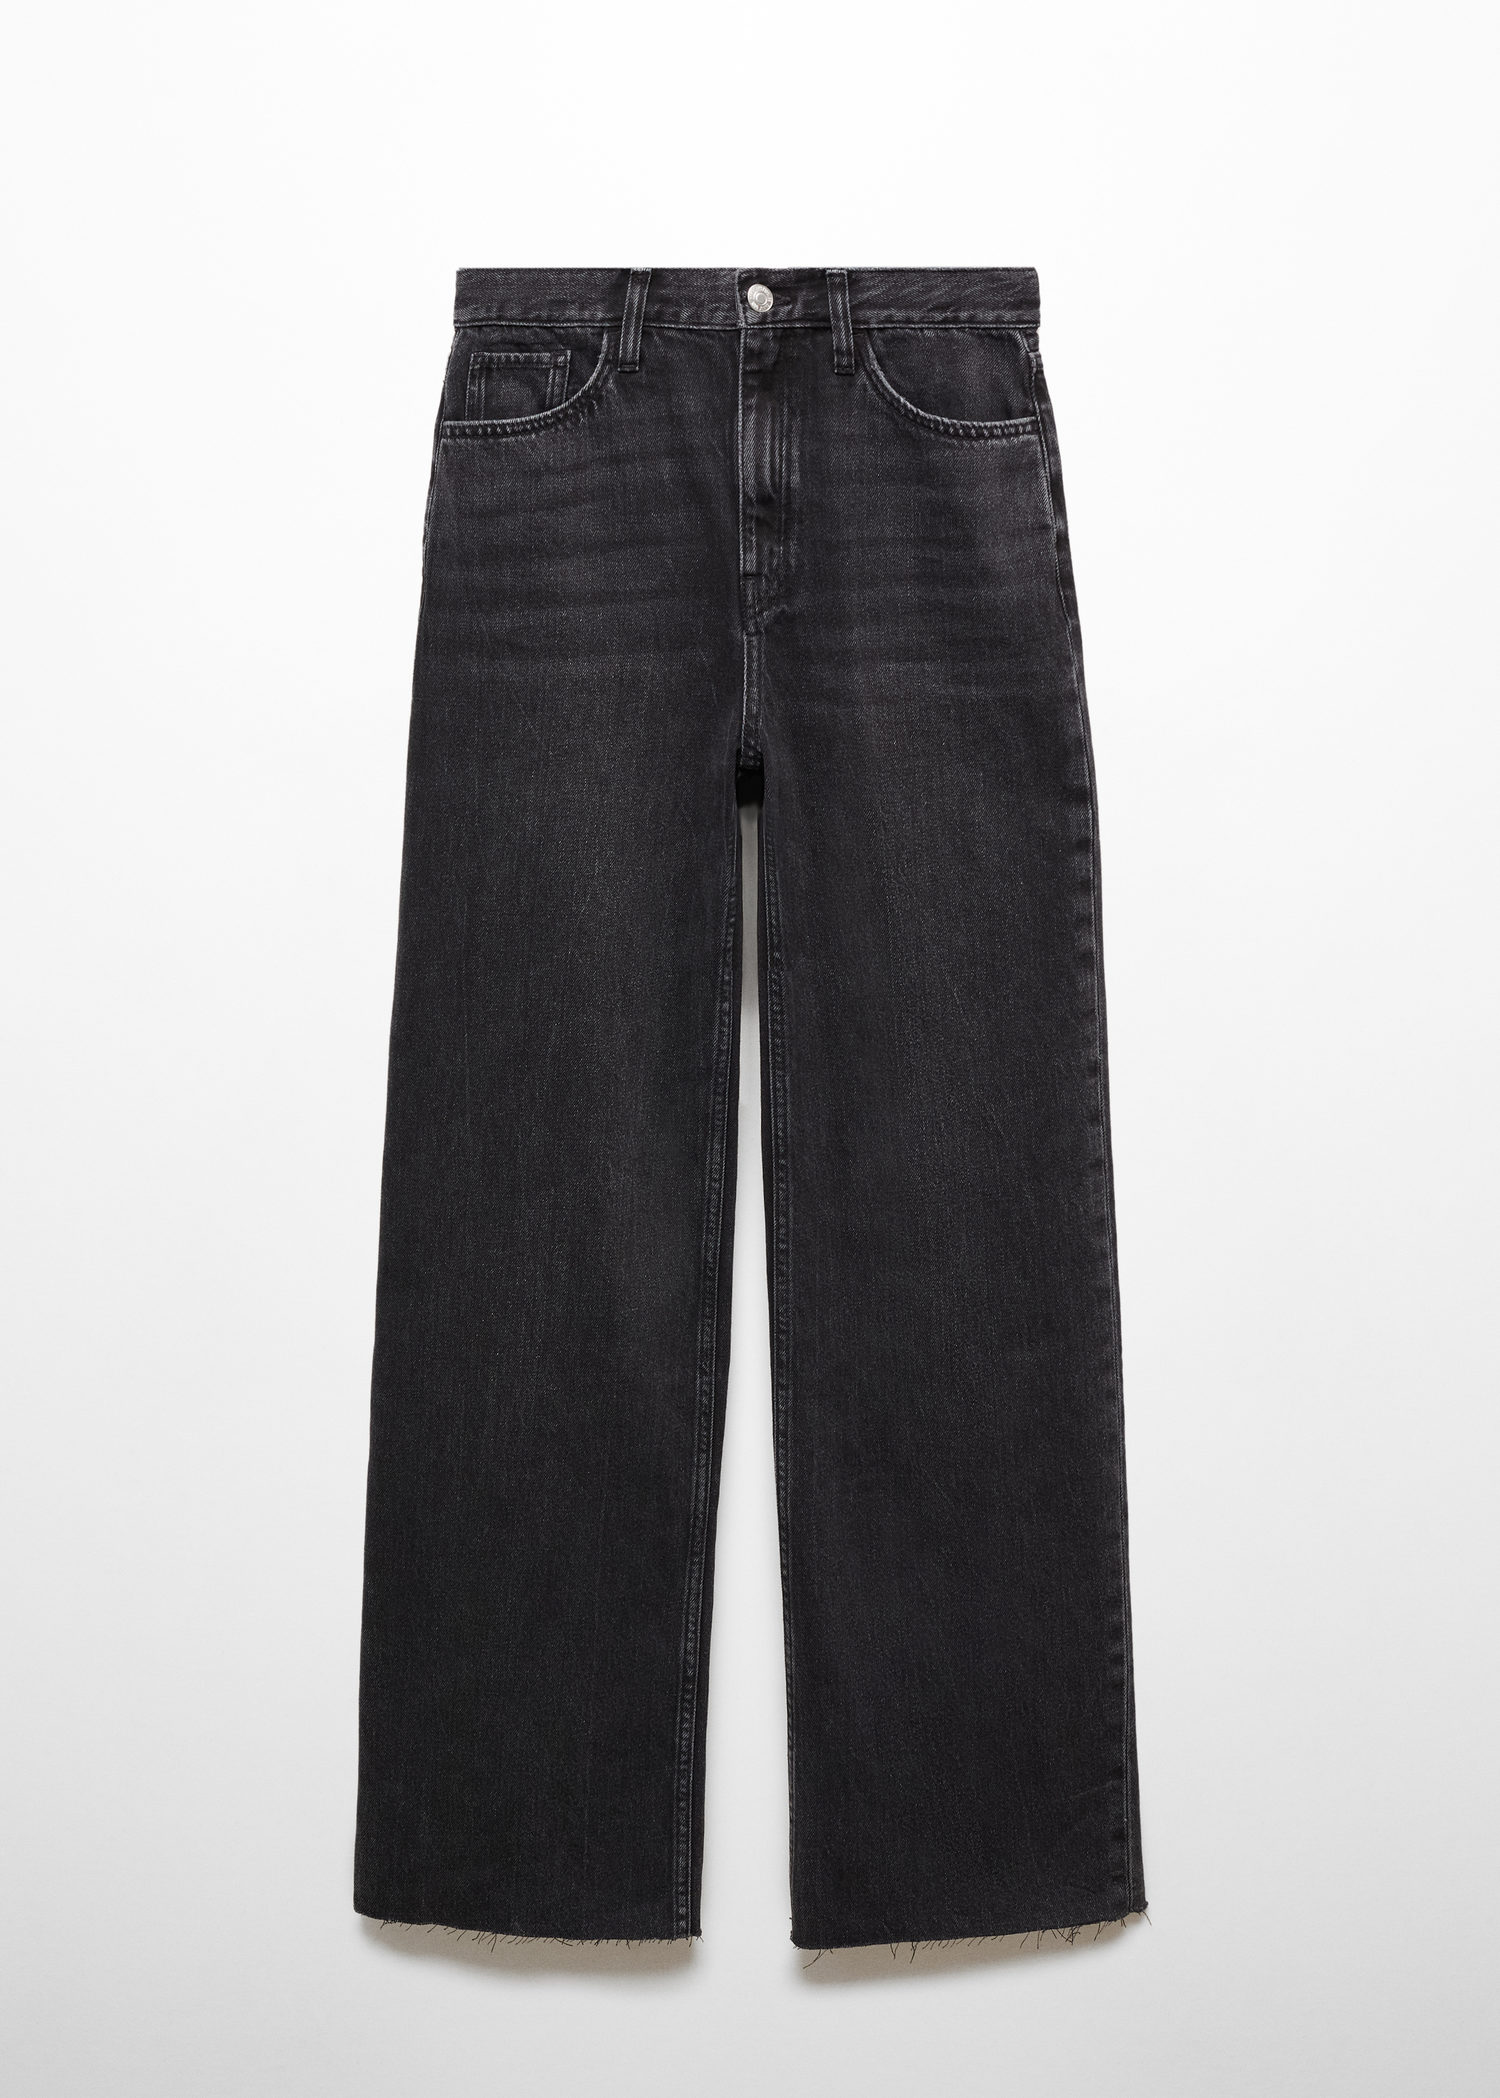 Z1975 MOM FIT JEANS WITH A HIGH WAIST - Black